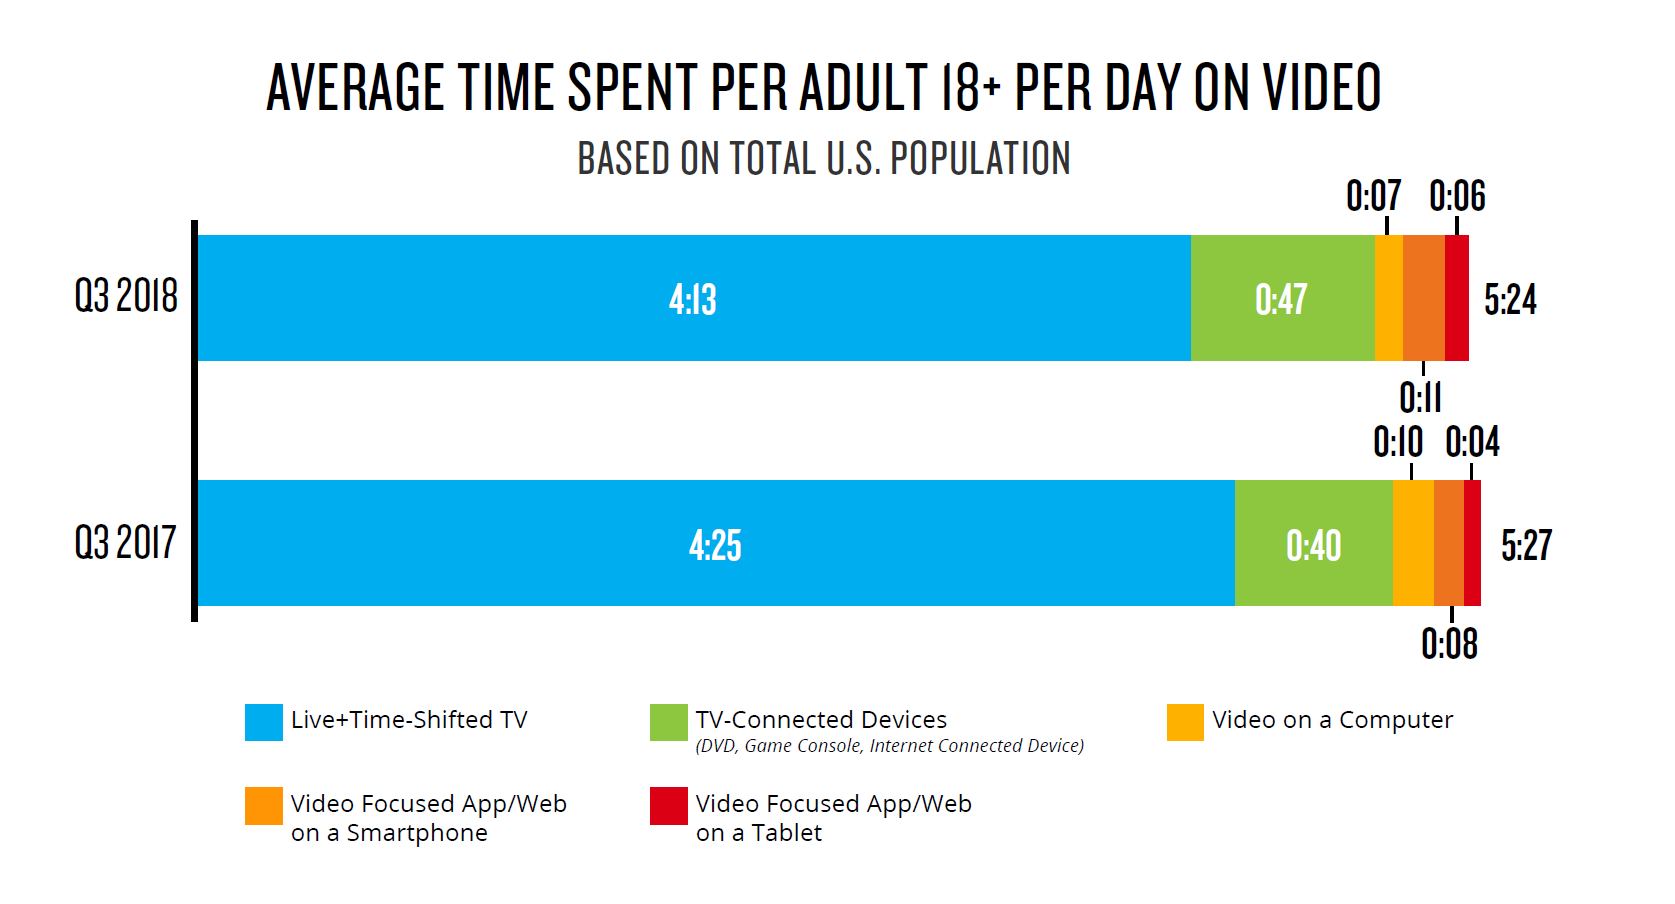 2- Average Time Spent on Video